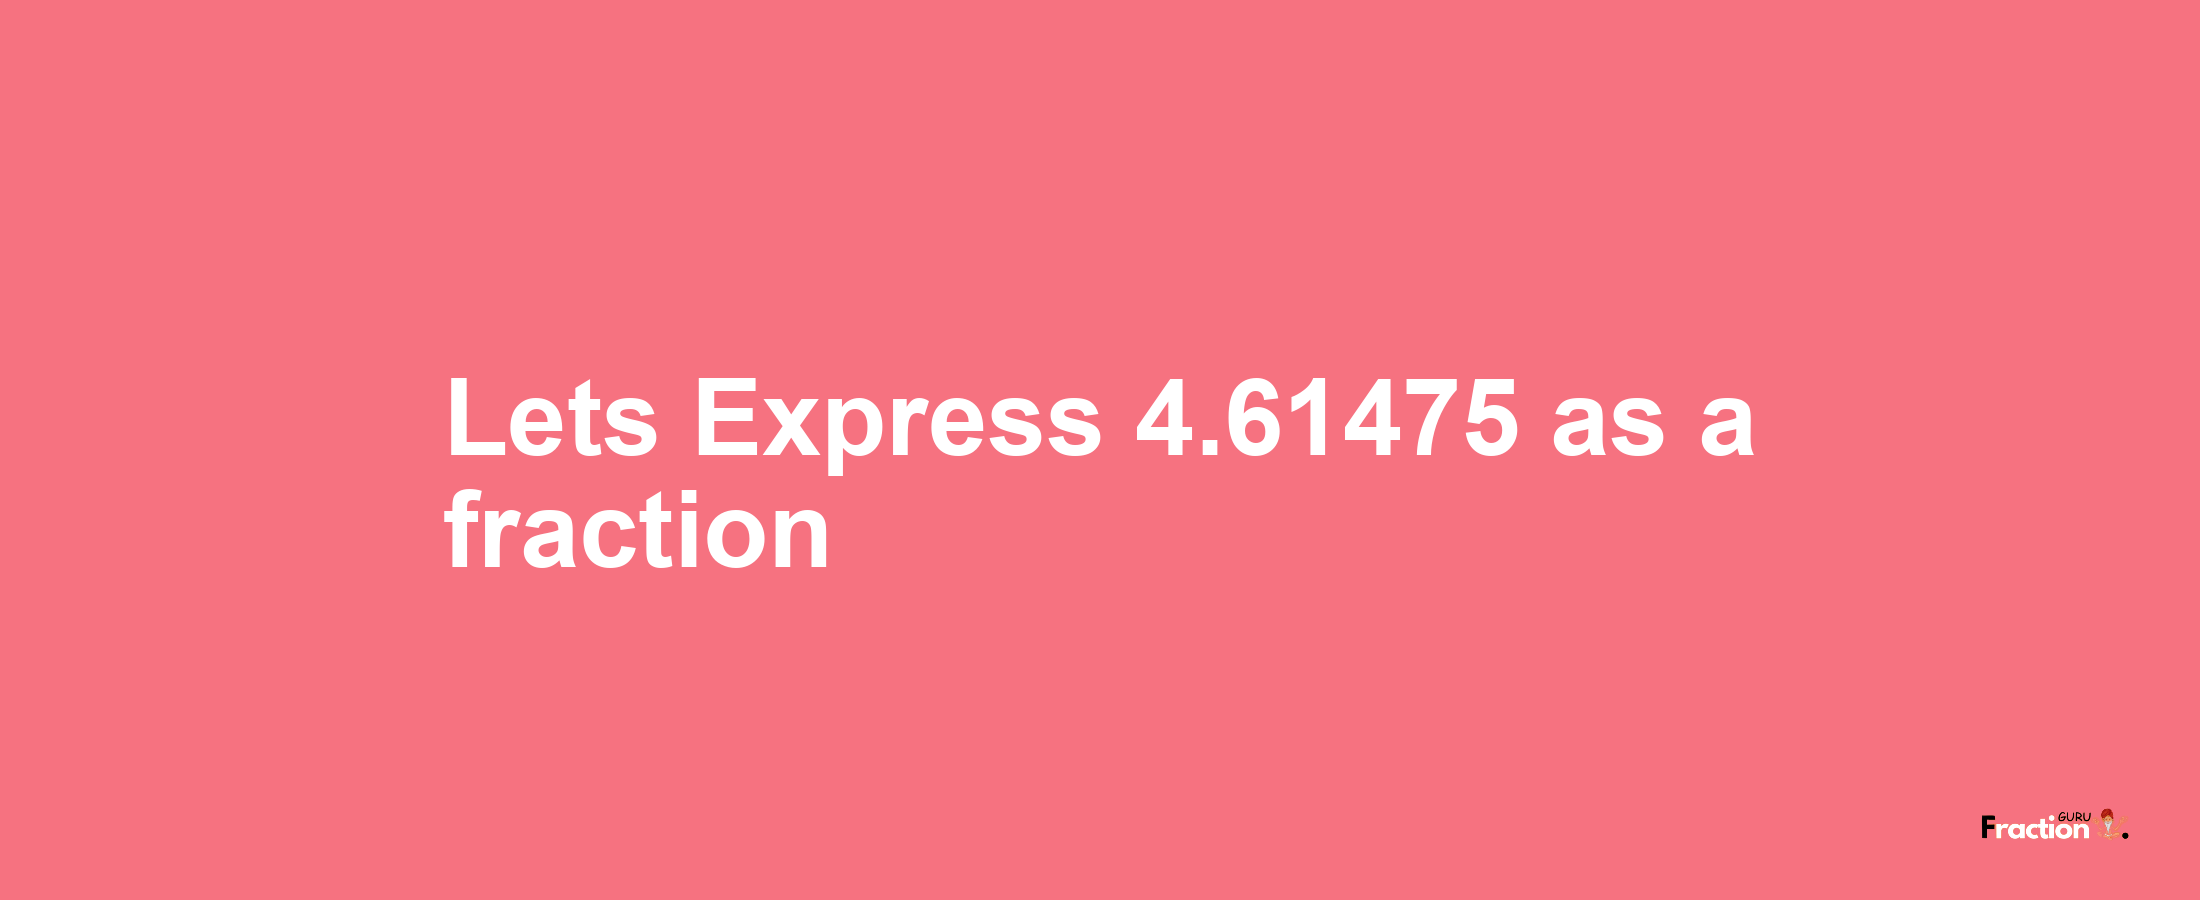 Lets Express 4.61475 as afraction